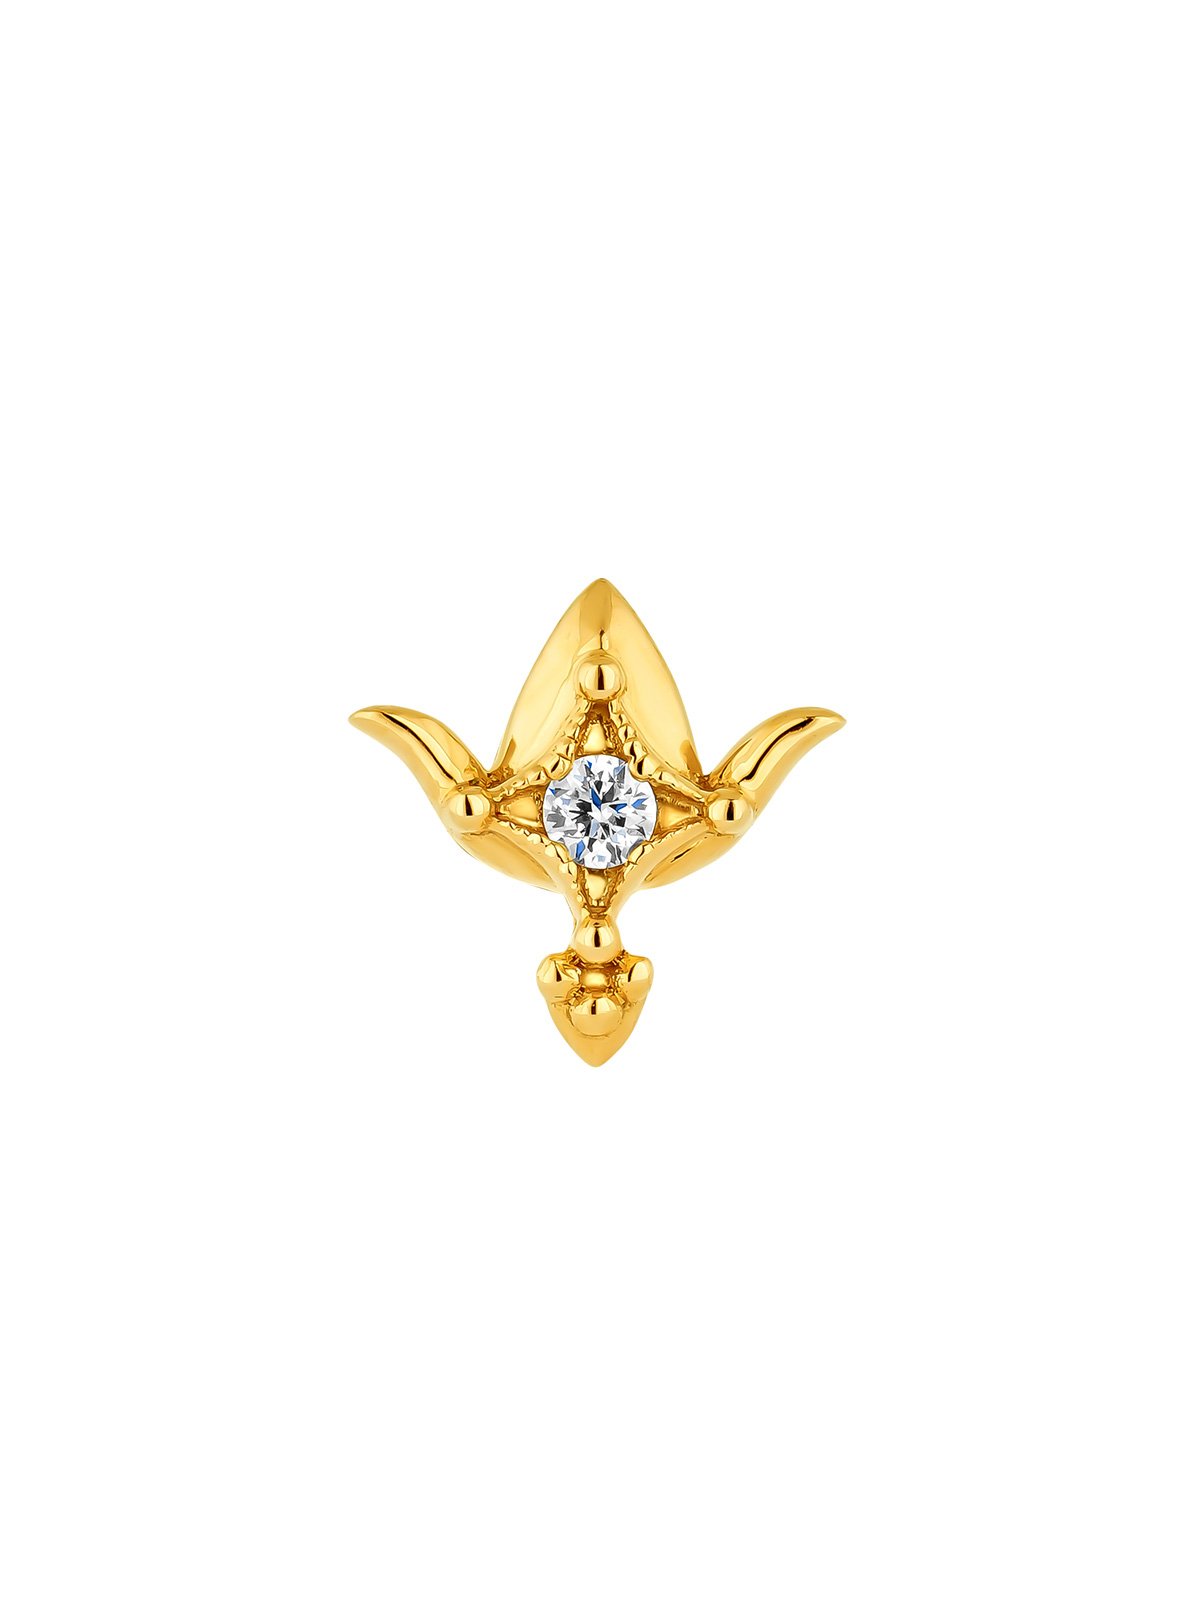 18K yellow gold piercing with diamond and lotus flower shape.